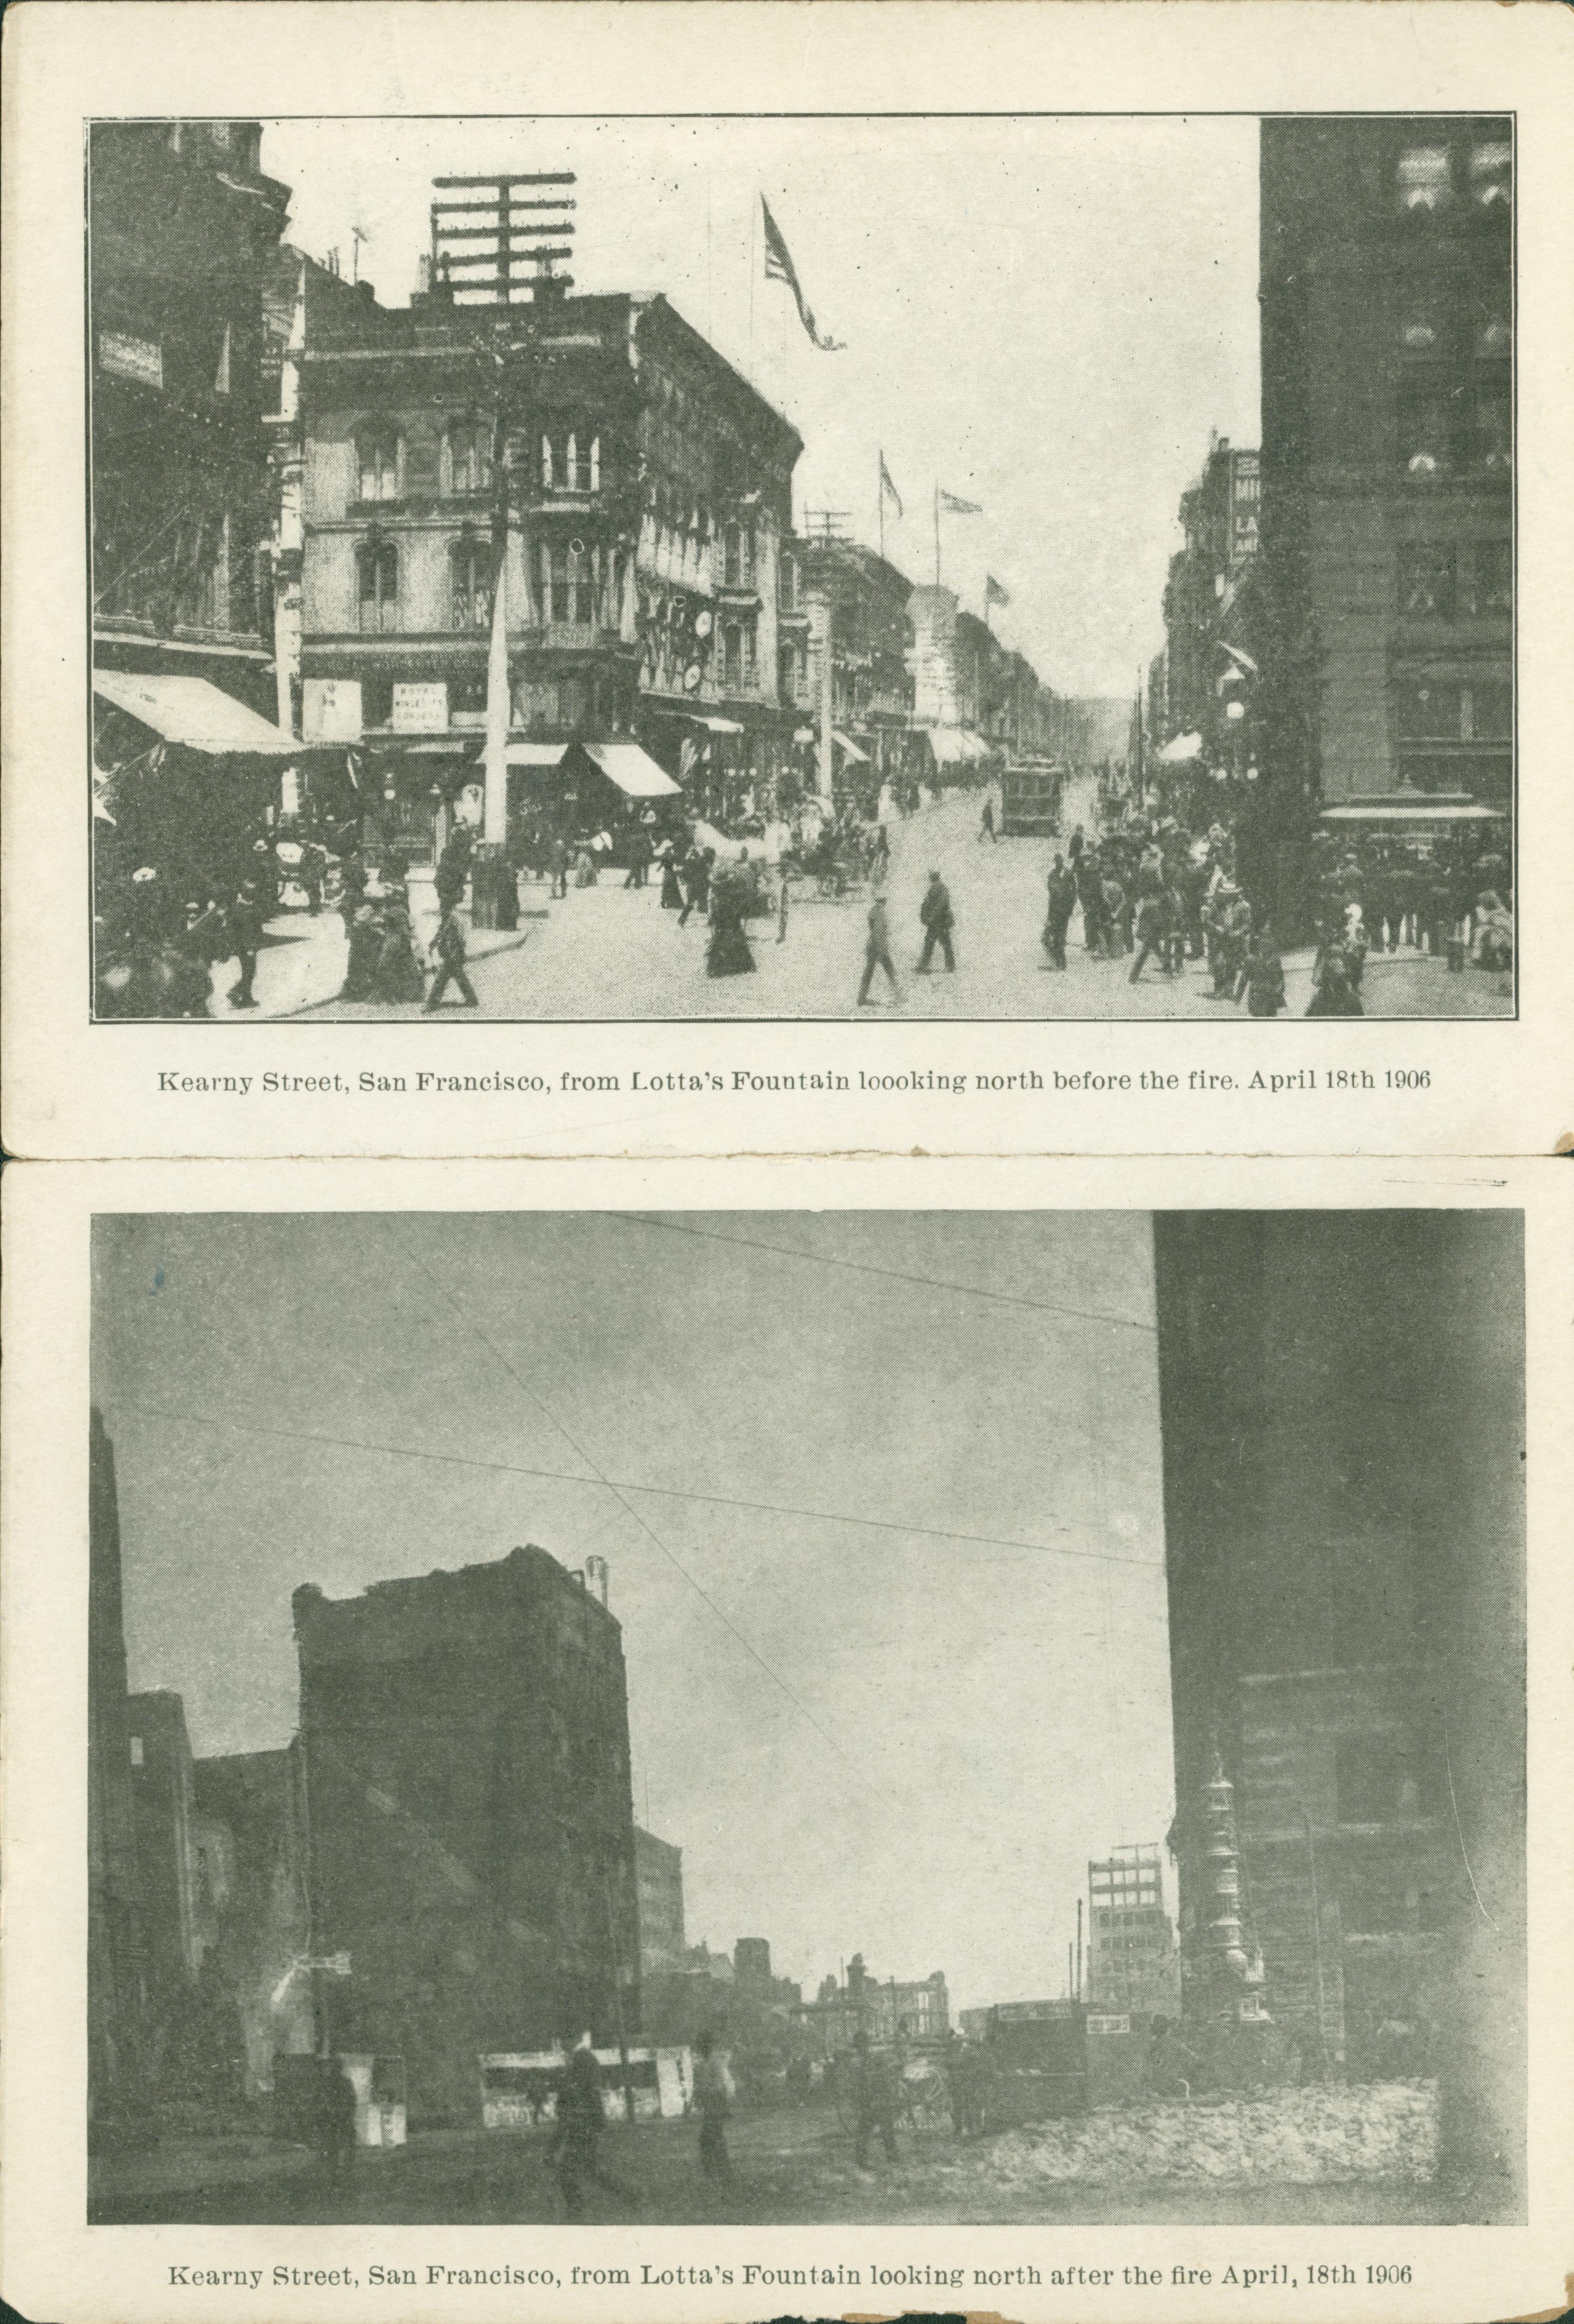 A set of two postcards attached. Both present the same view, one before the fire of 1906, one after.